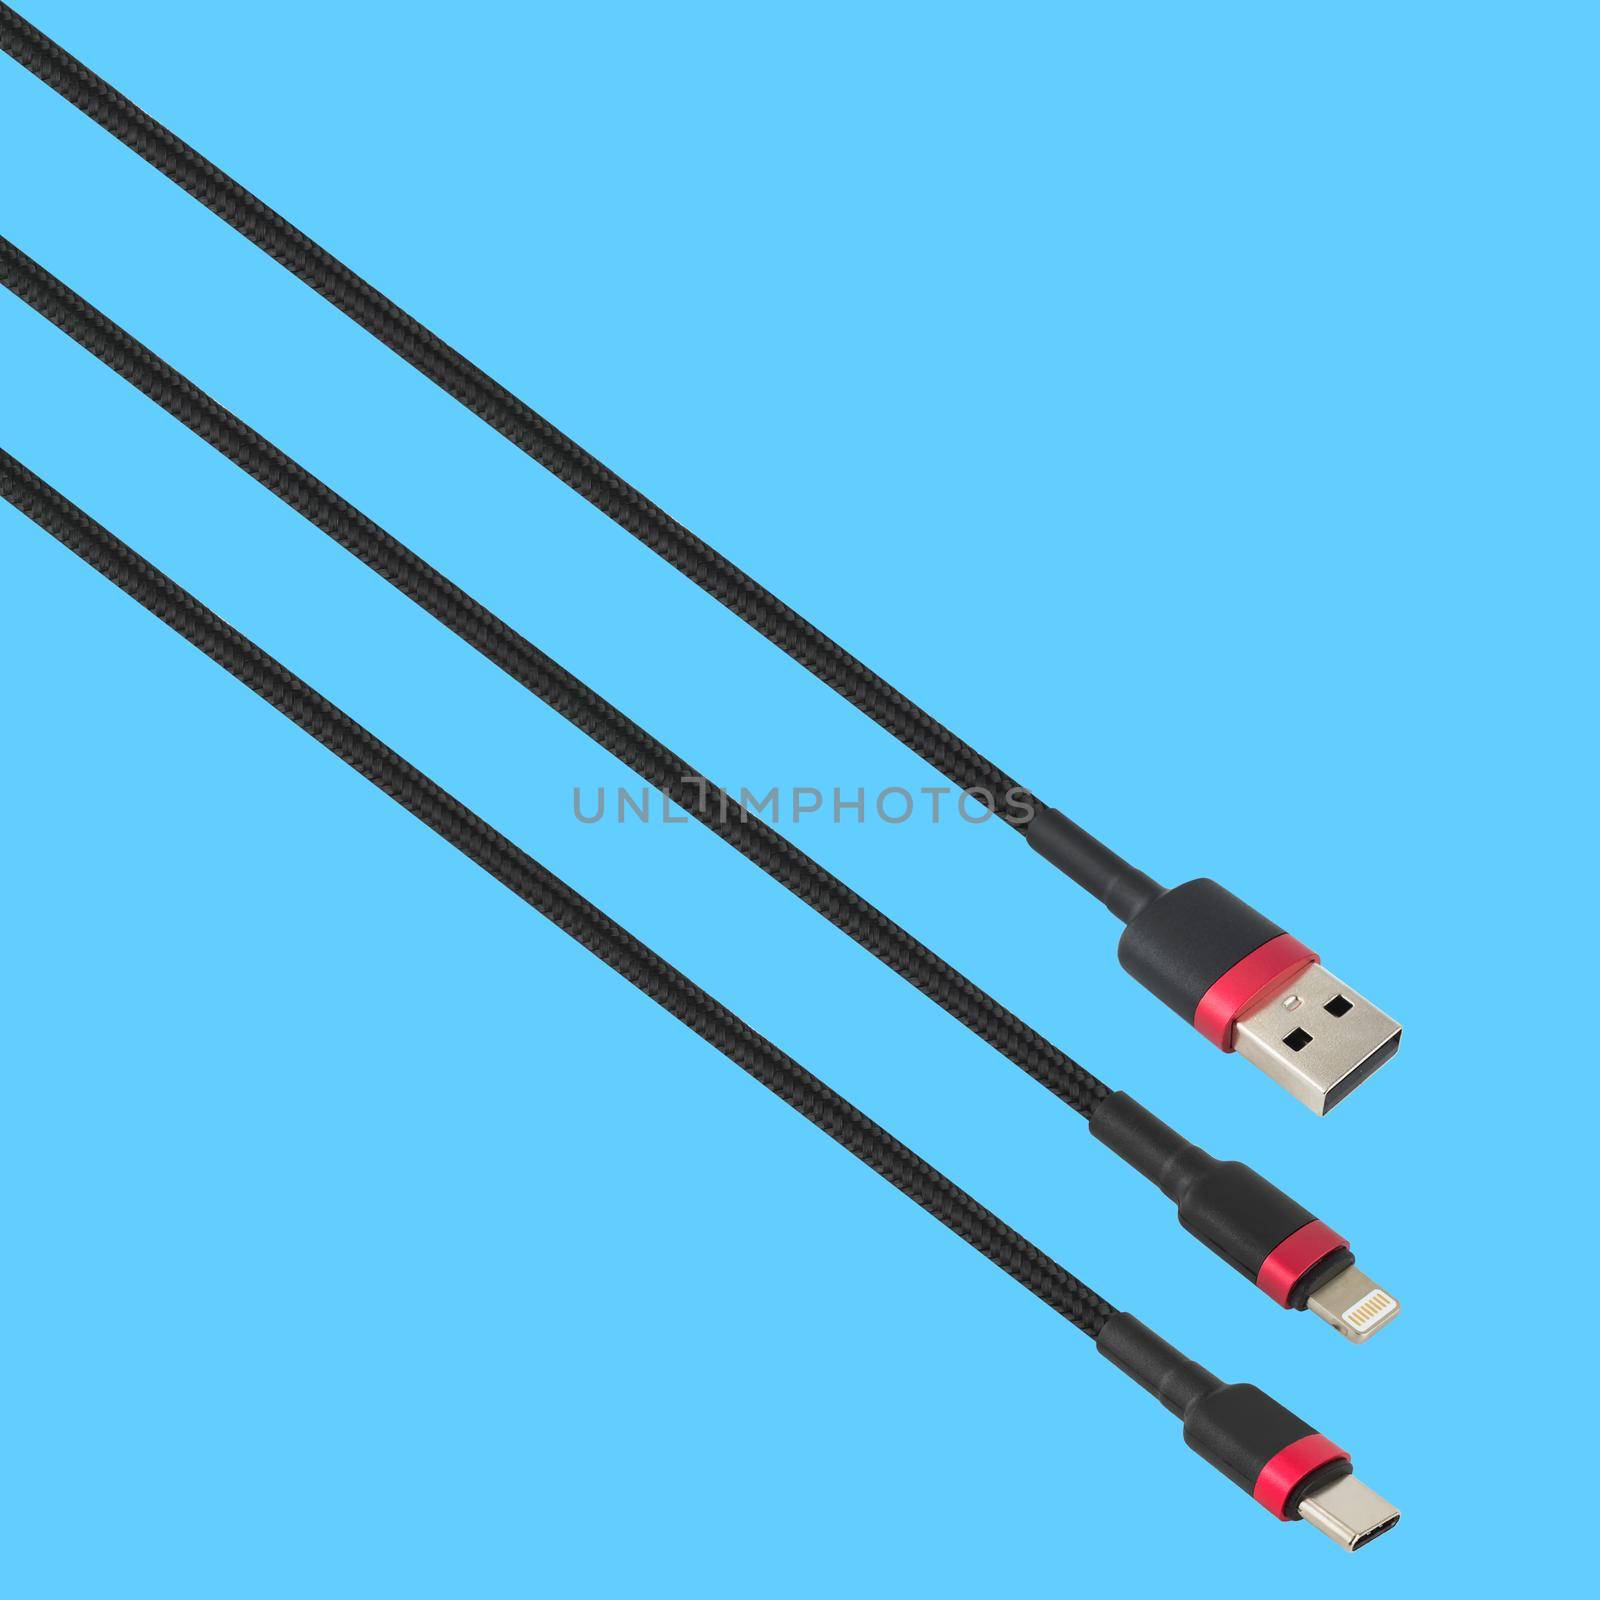 Cable with USB, Type-C and Lightning connector, on a blue background by A_A